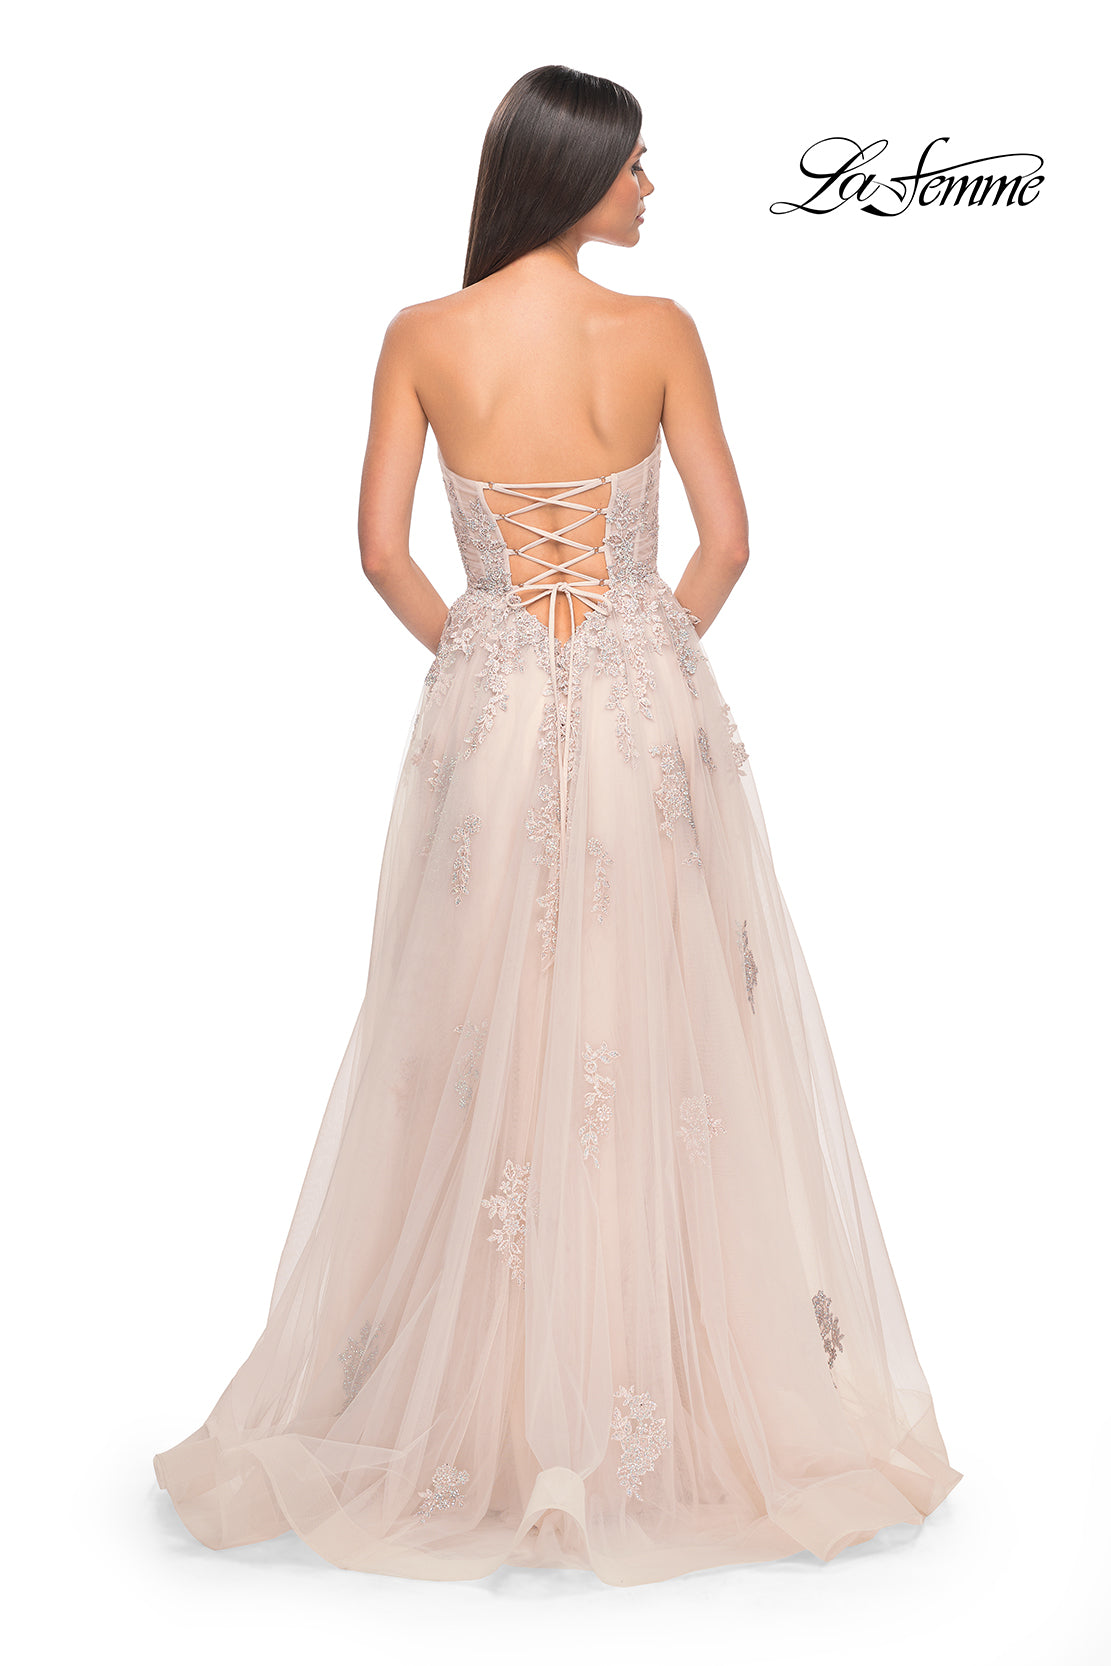 Strapless Corset Back Gown with Intricate Beaded Bodice